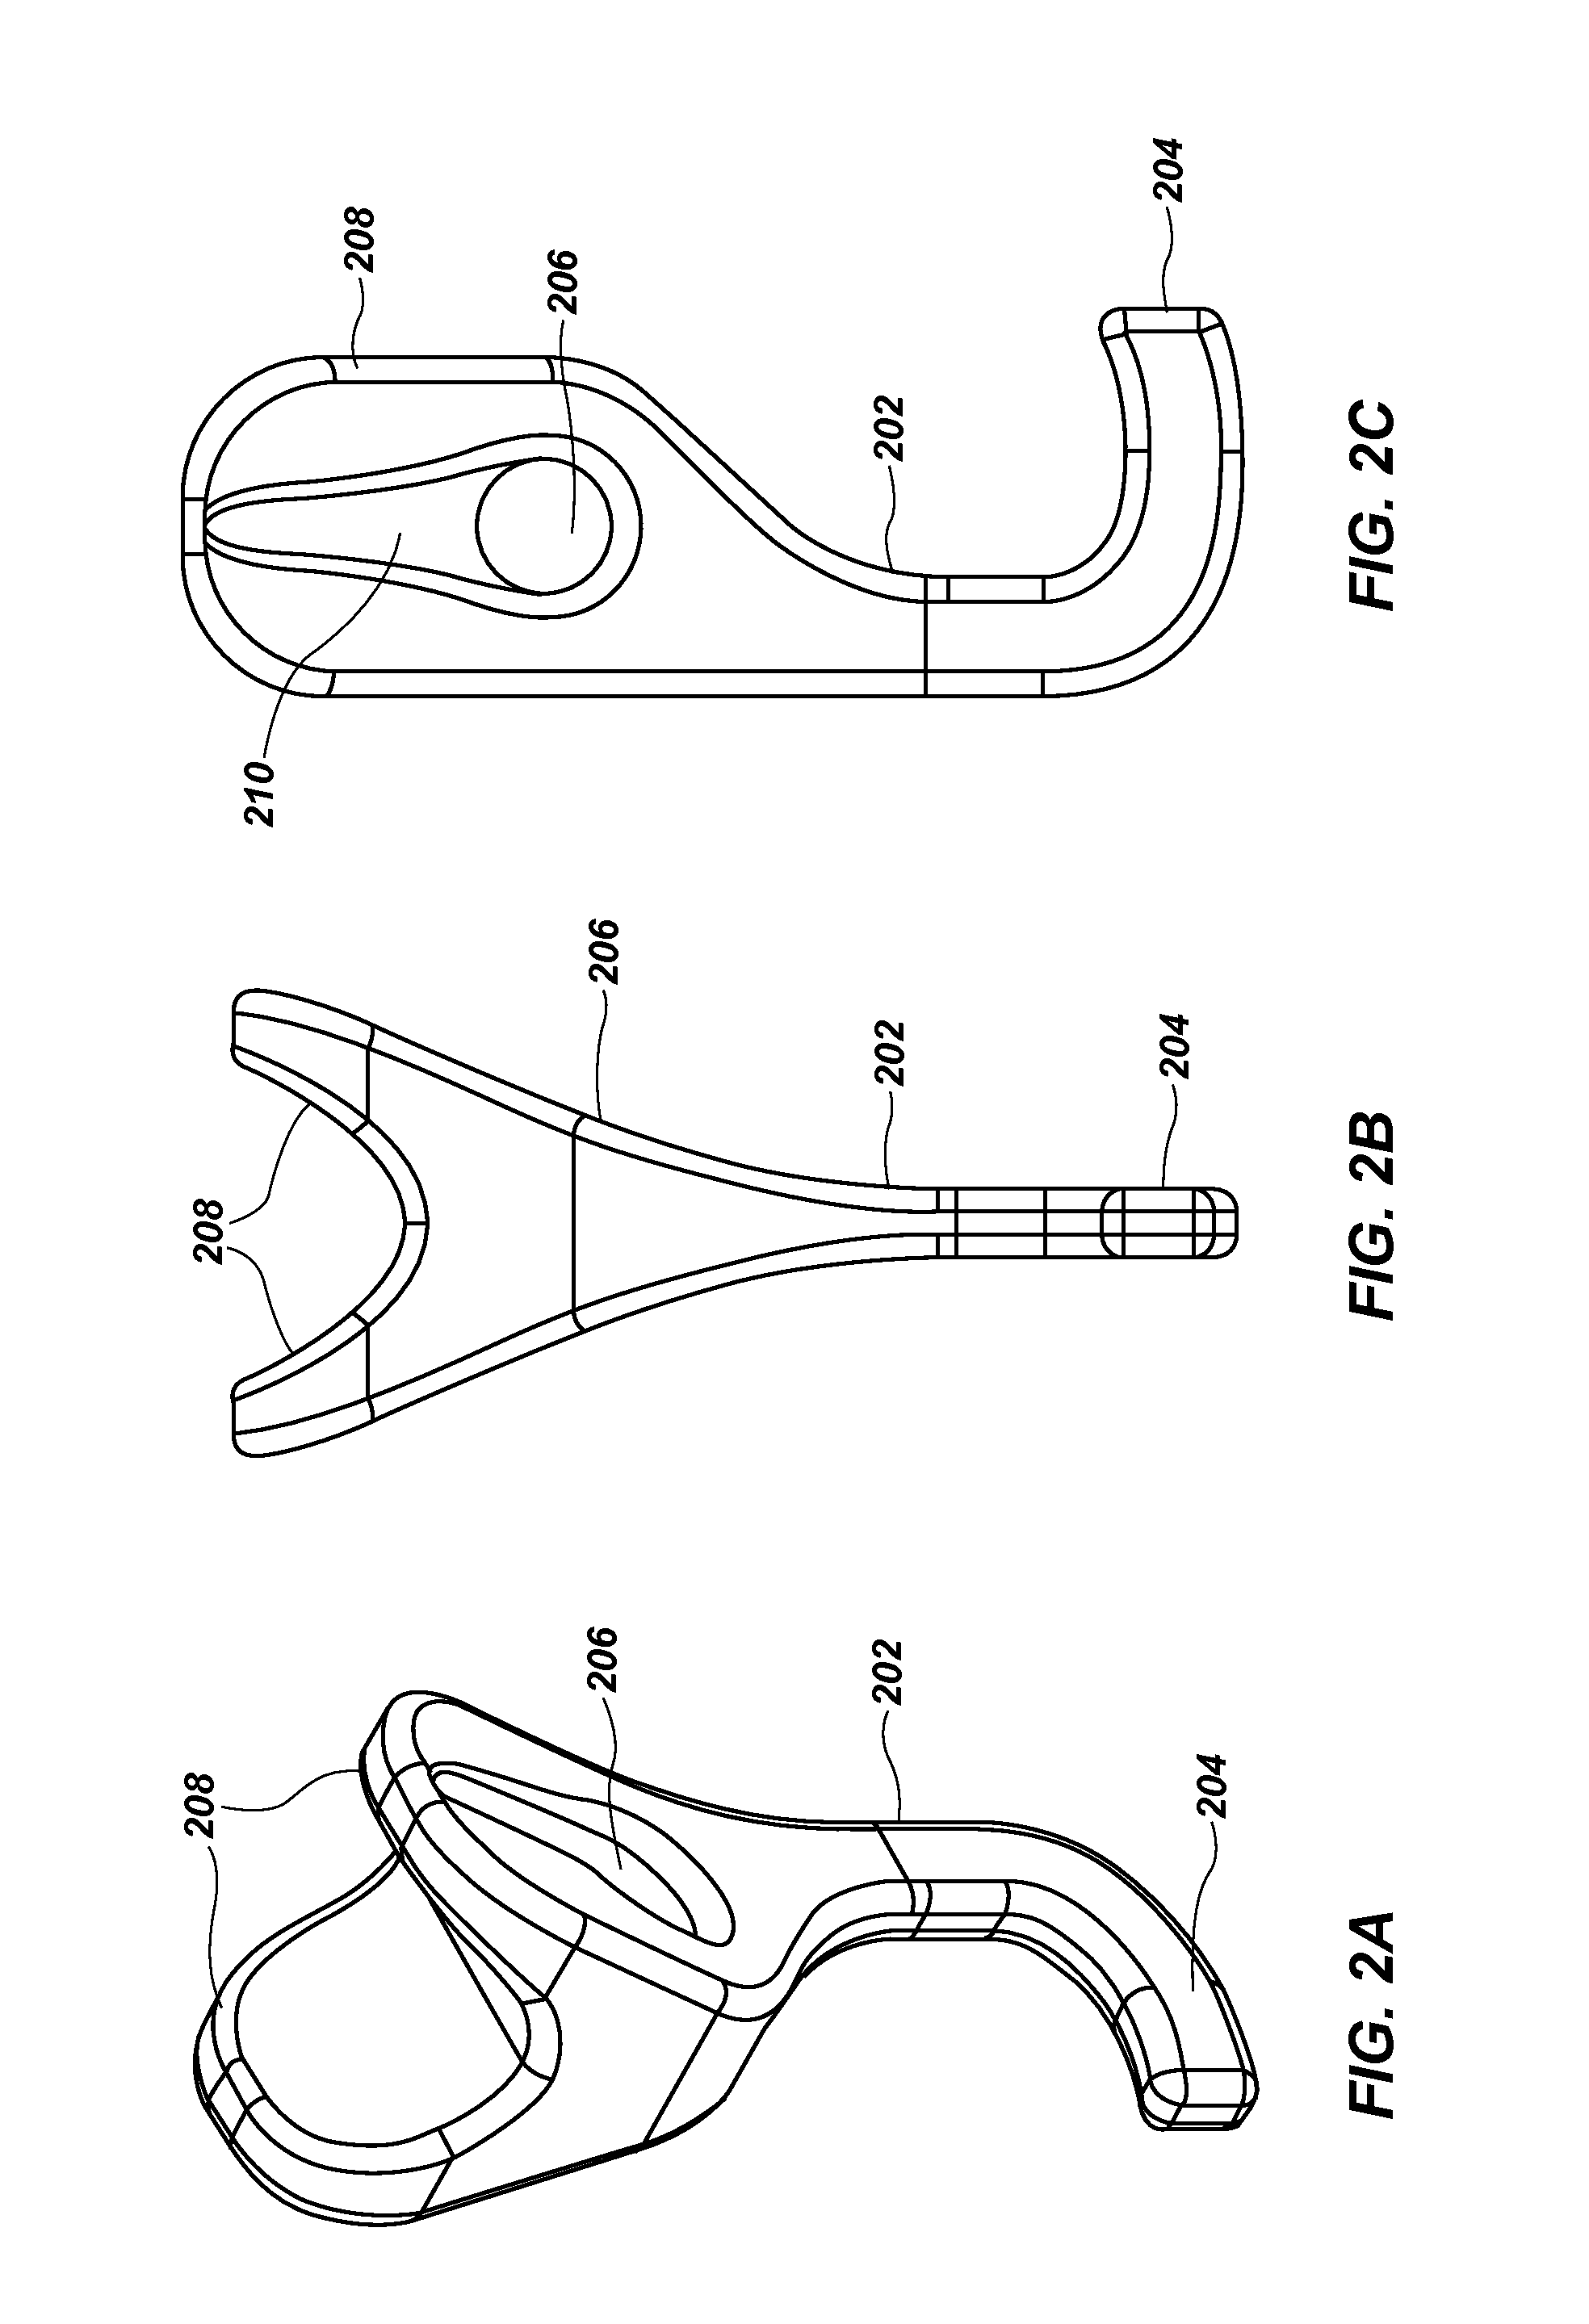 Orthotic device, system and methods for addressing foot drop